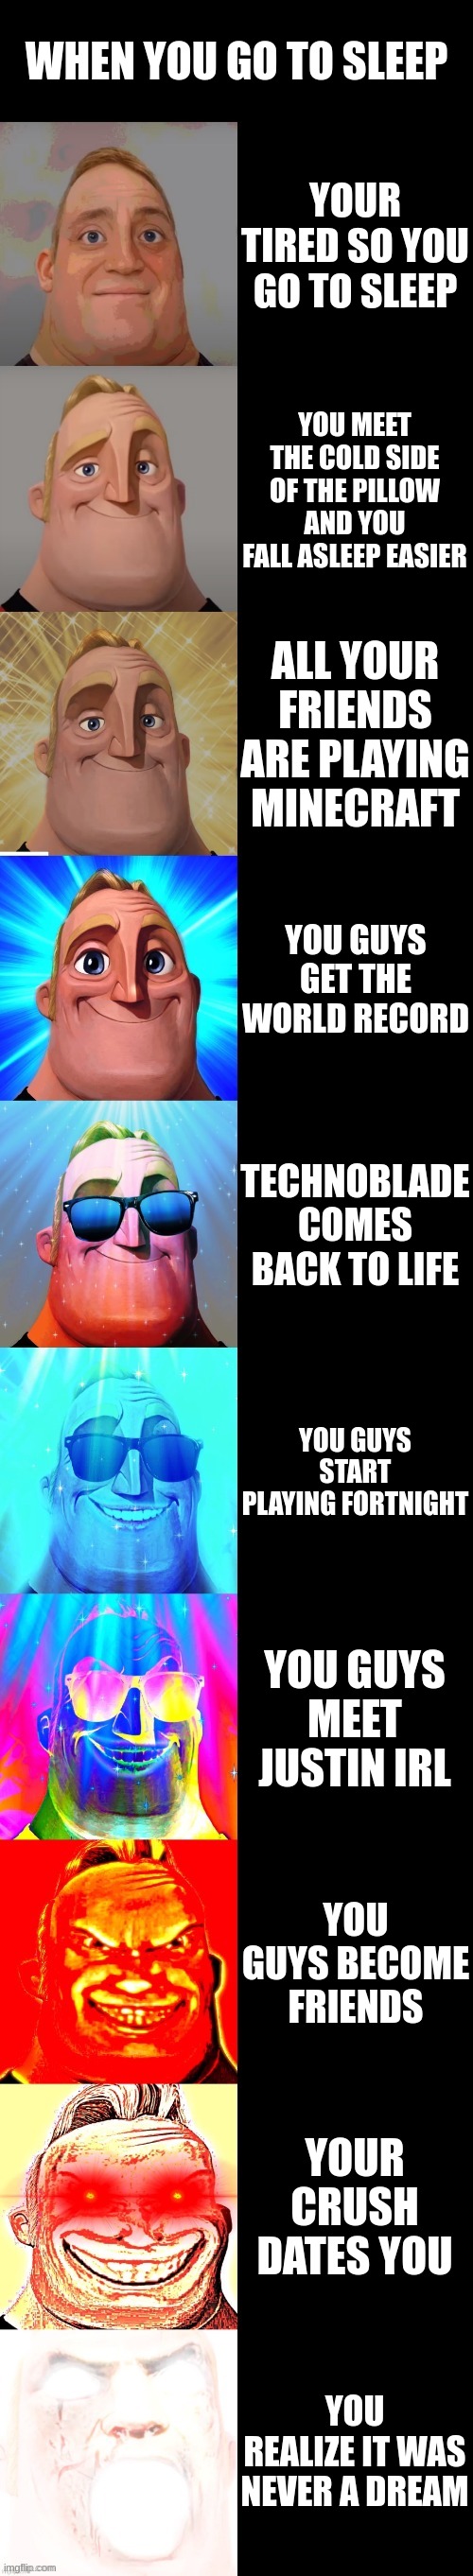 mr incredible becoming canny |  WHEN YOU GO TO SLEEP; YOUR TIRED SO YOU GO TO SLEEP; YOU MEET THE COLD SIDE OF THE PILLOW AND YOU FALL ASLEEP EASIER; ALL YOUR FRIENDS ARE PLAYING MINECRAFT; YOU GUYS GET THE WORLD RECORD; TECHNOBLADE COMES BACK TO LIFE; YOU GUYS START PLAYING FORTNIGHT; YOU GUYS MEET JUSTIN IRL; YOU GUYS BECOME FRIENDS; YOUR CRUSH DATES YOU; YOU REALIZE IT WAS NEVER A DREAM | image tagged in mr incredible becoming canny | made w/ Imgflip meme maker